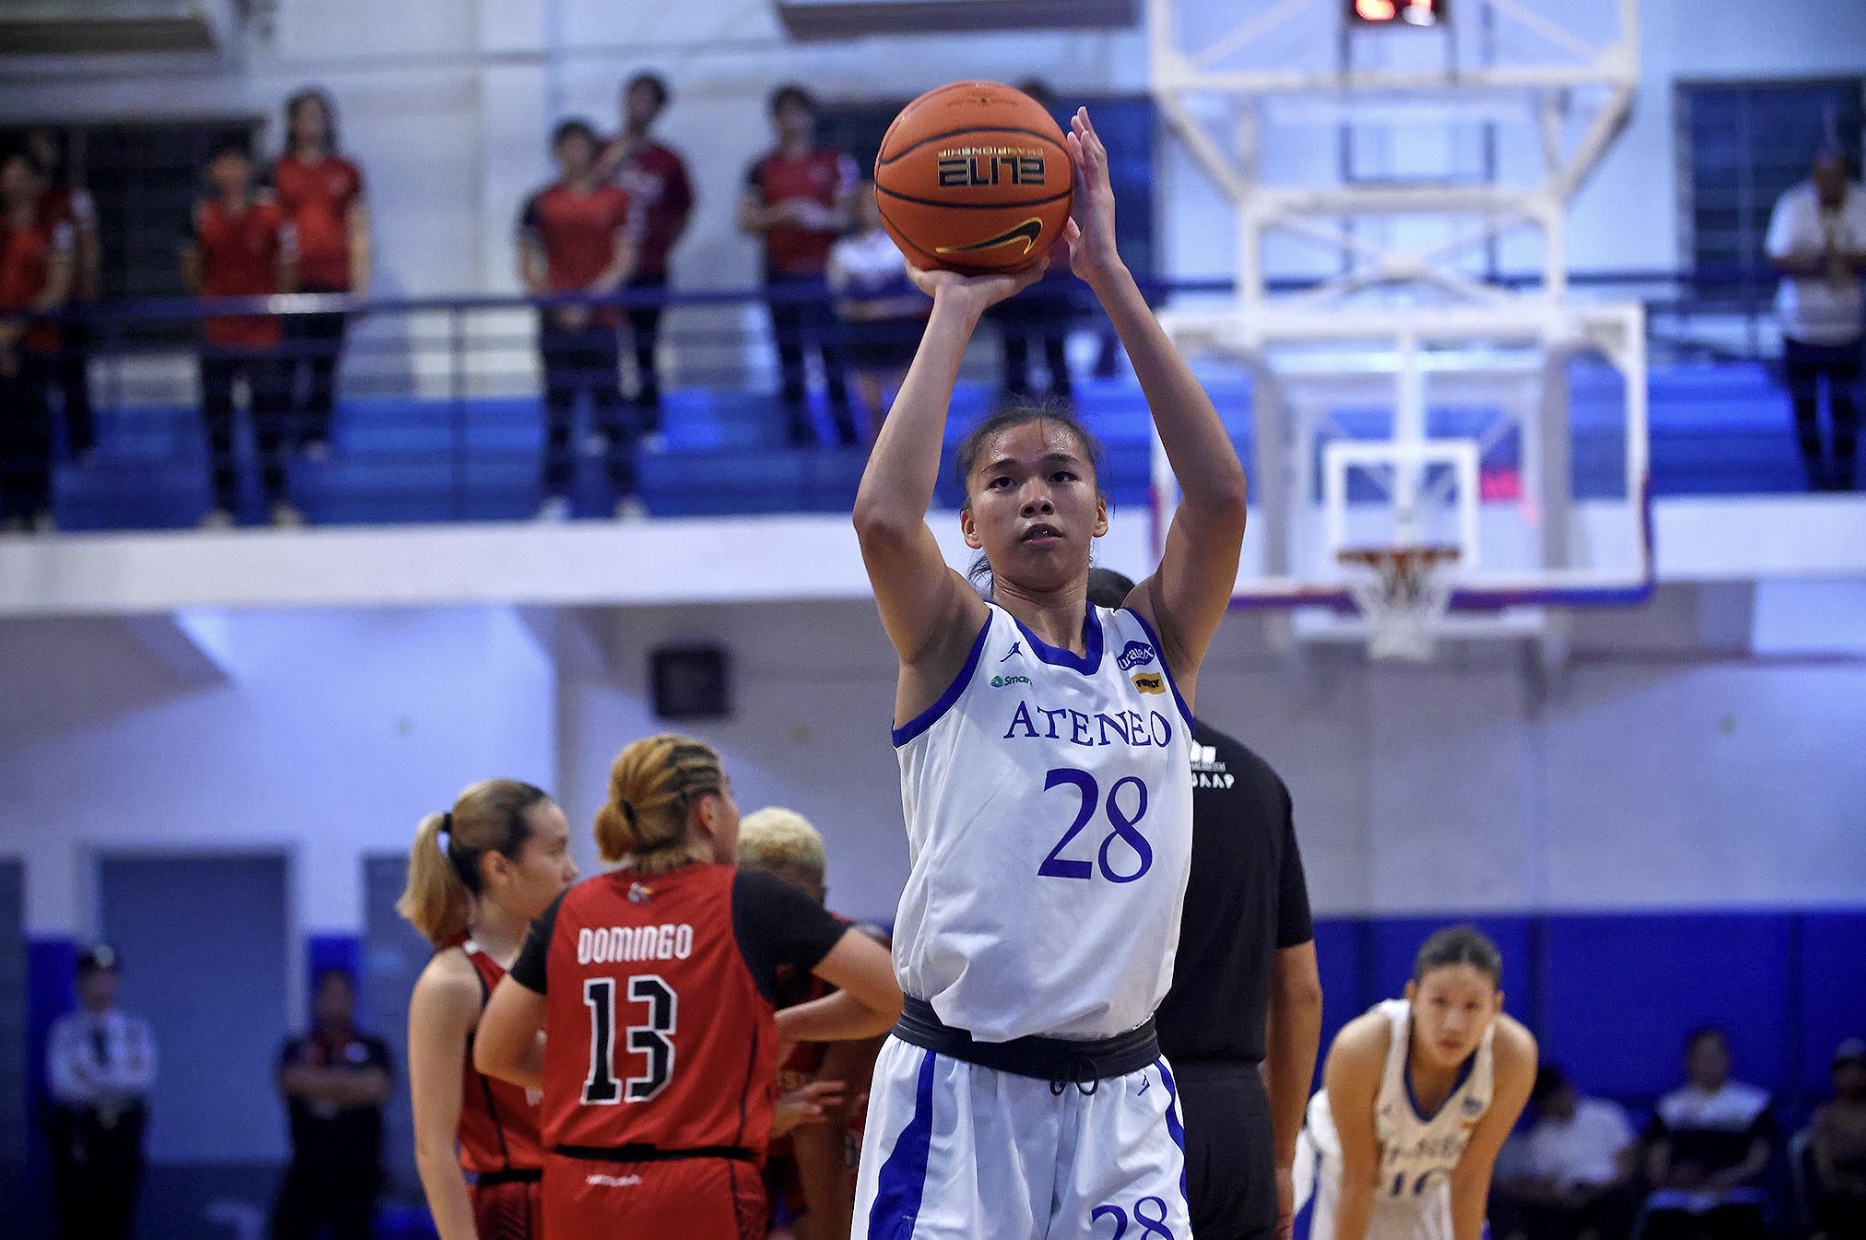 Kacey Dela Rosa leads the UAAP Season 86 women's basketball MVP race after round 1 of eliminations